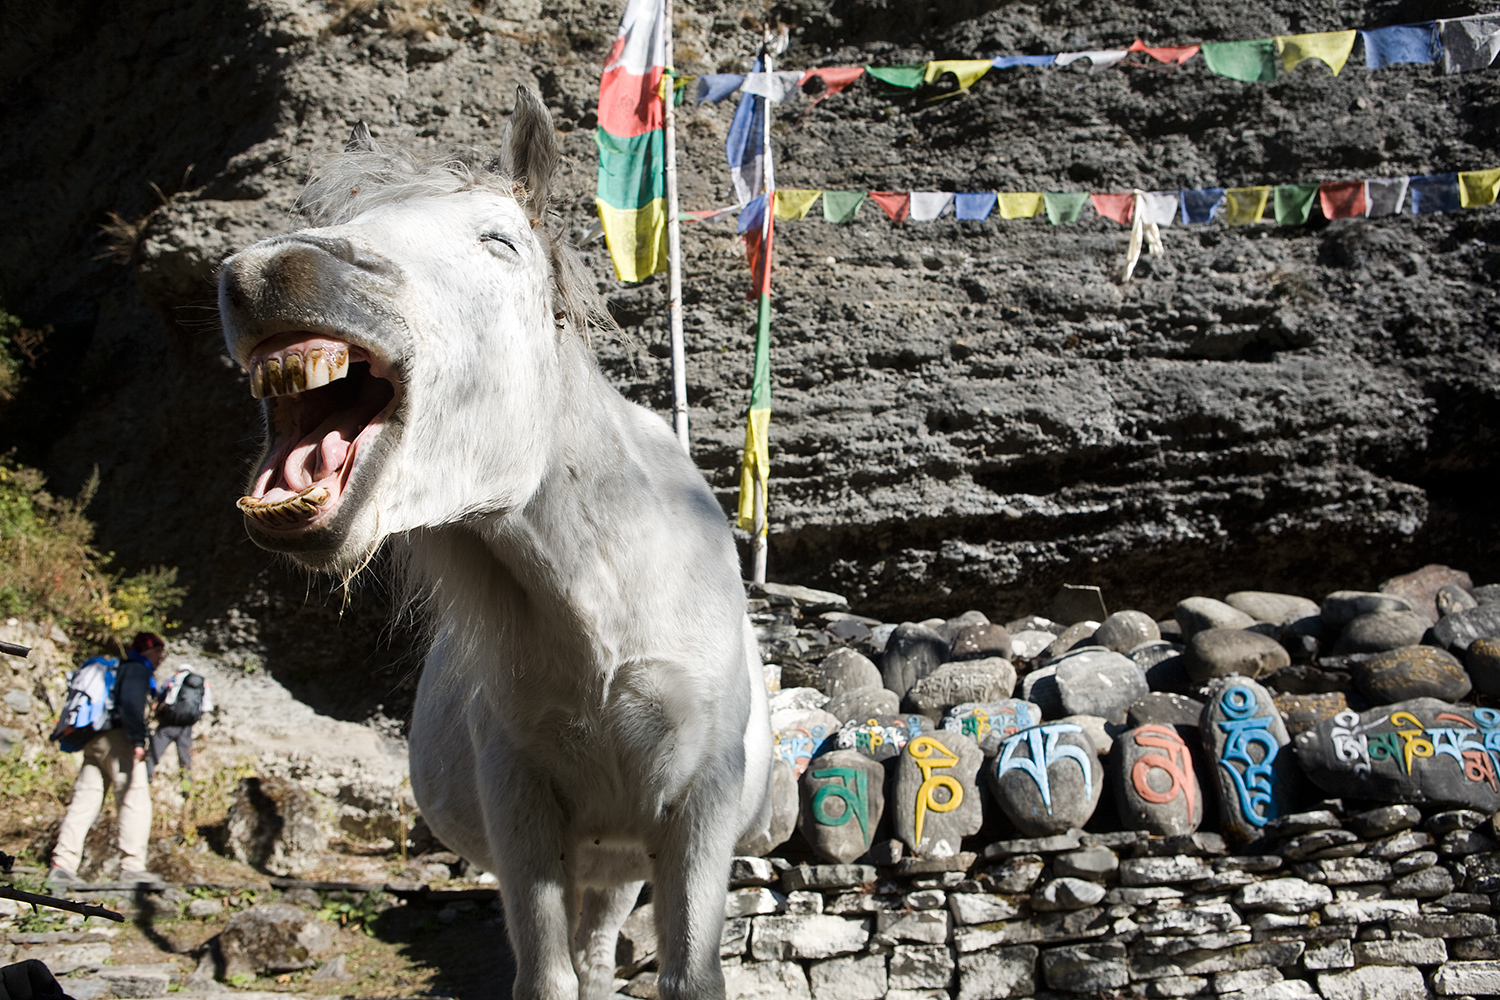  A horse yawns in the morning in front of a Buddhist offering site. Carved and painted on the stones behind him is the sacred mantra  om mani padme hum , which many consider to be the most spoken mantra in Buddhism. 